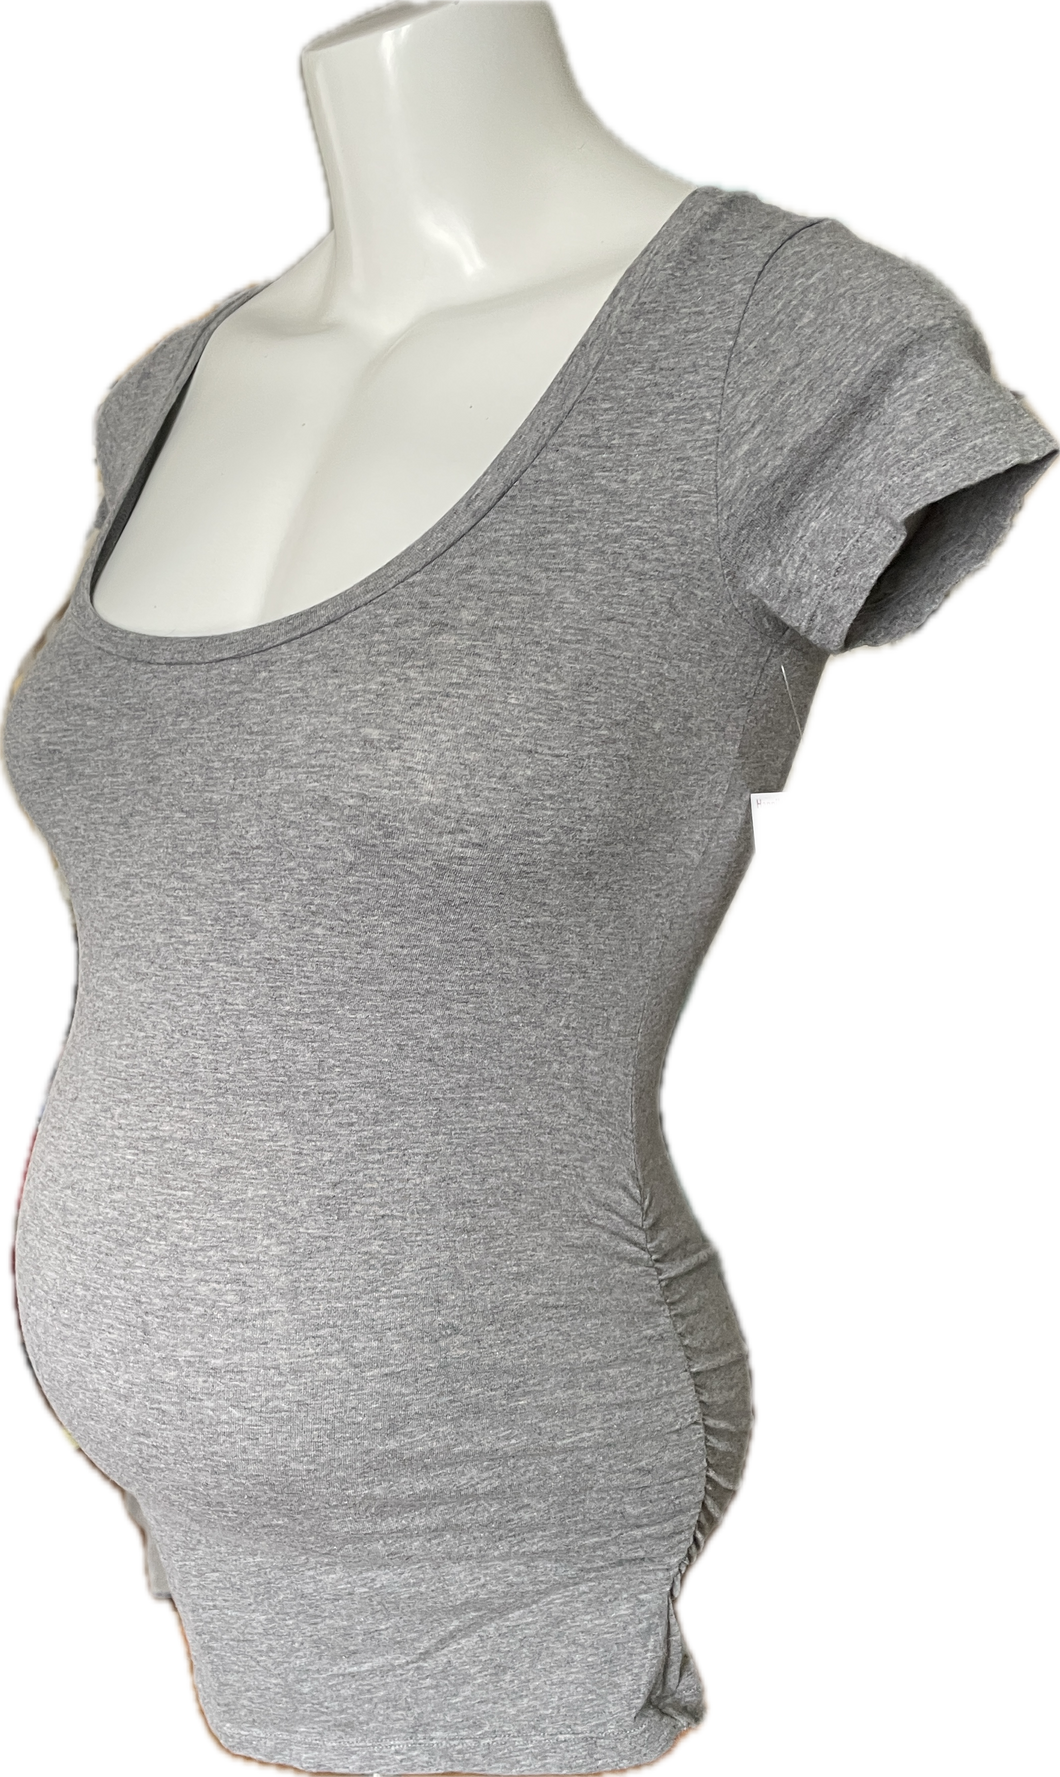 XS Old Navy Maternity Short Sleeve top in Grey